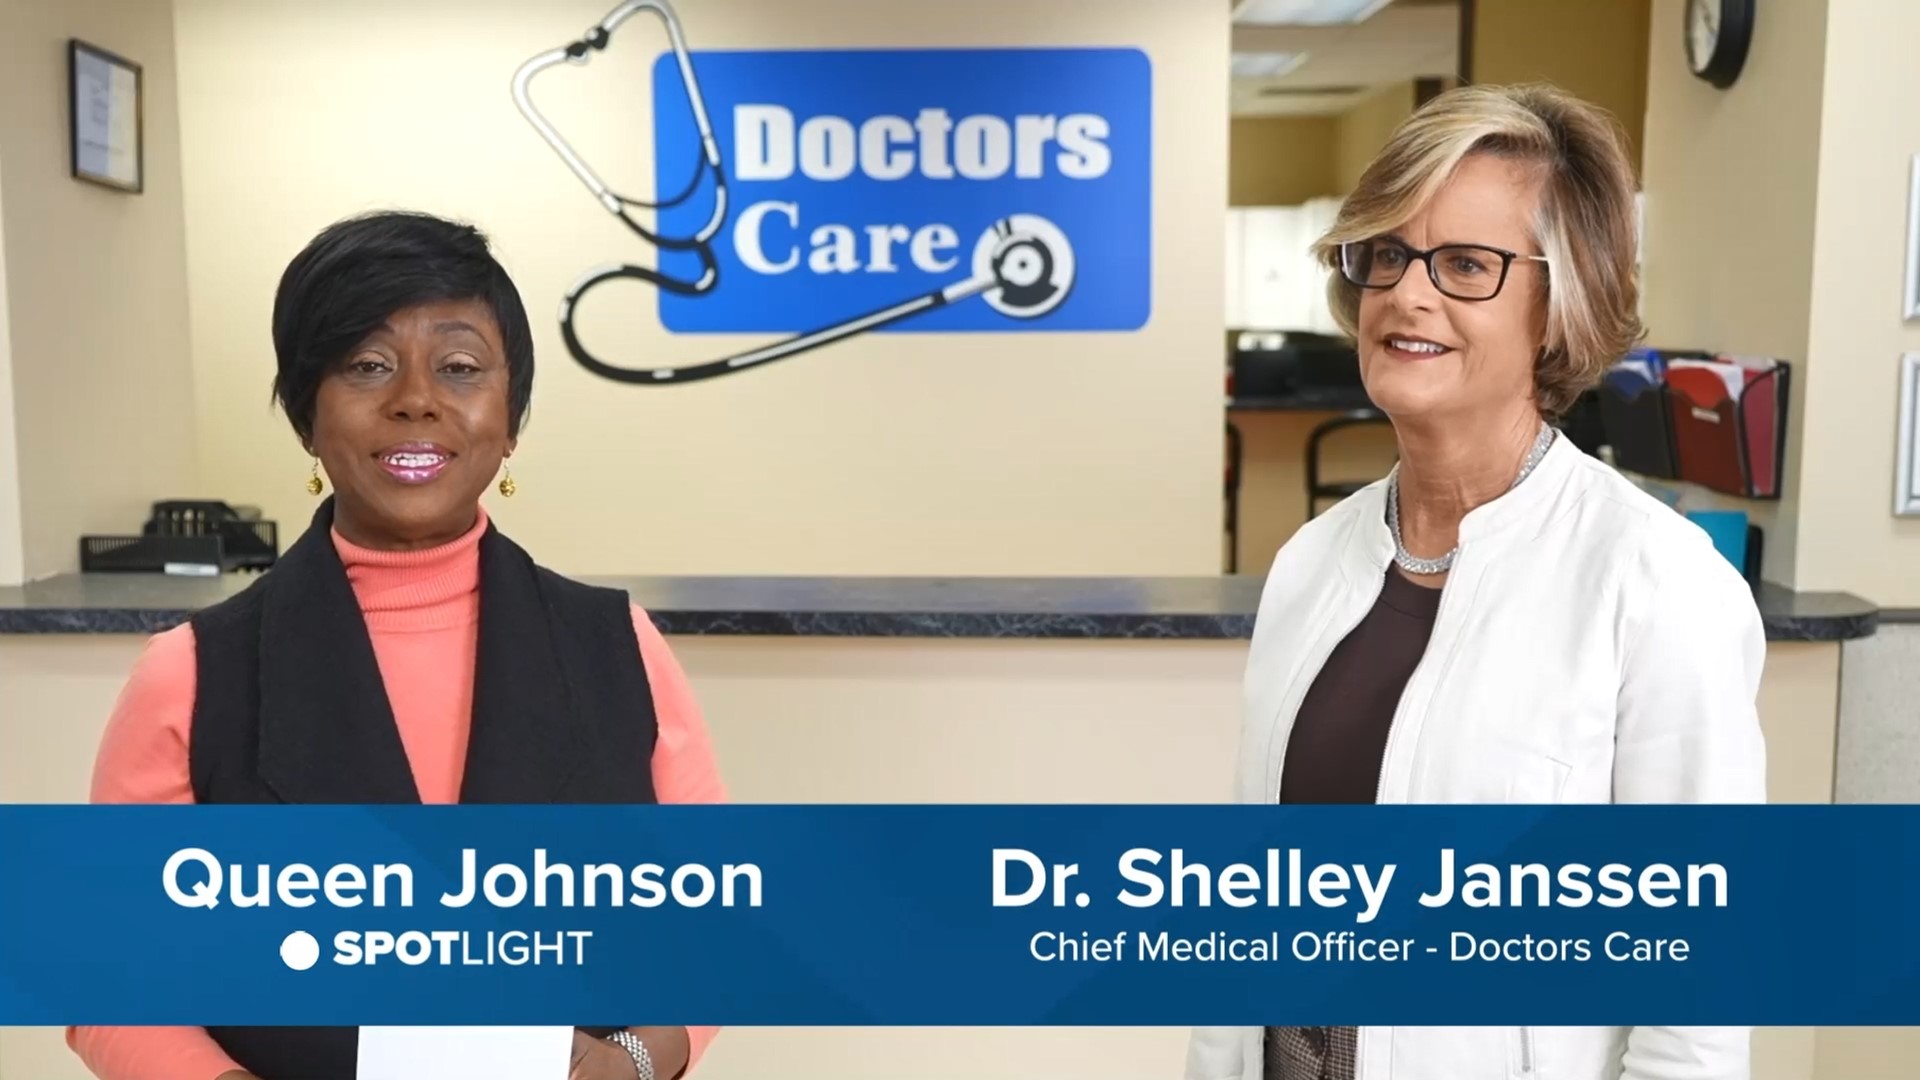 Hear from Dr. Shelley Janssen, CMO of Doctors Care, as she talks about the flu season and flu prevention steps